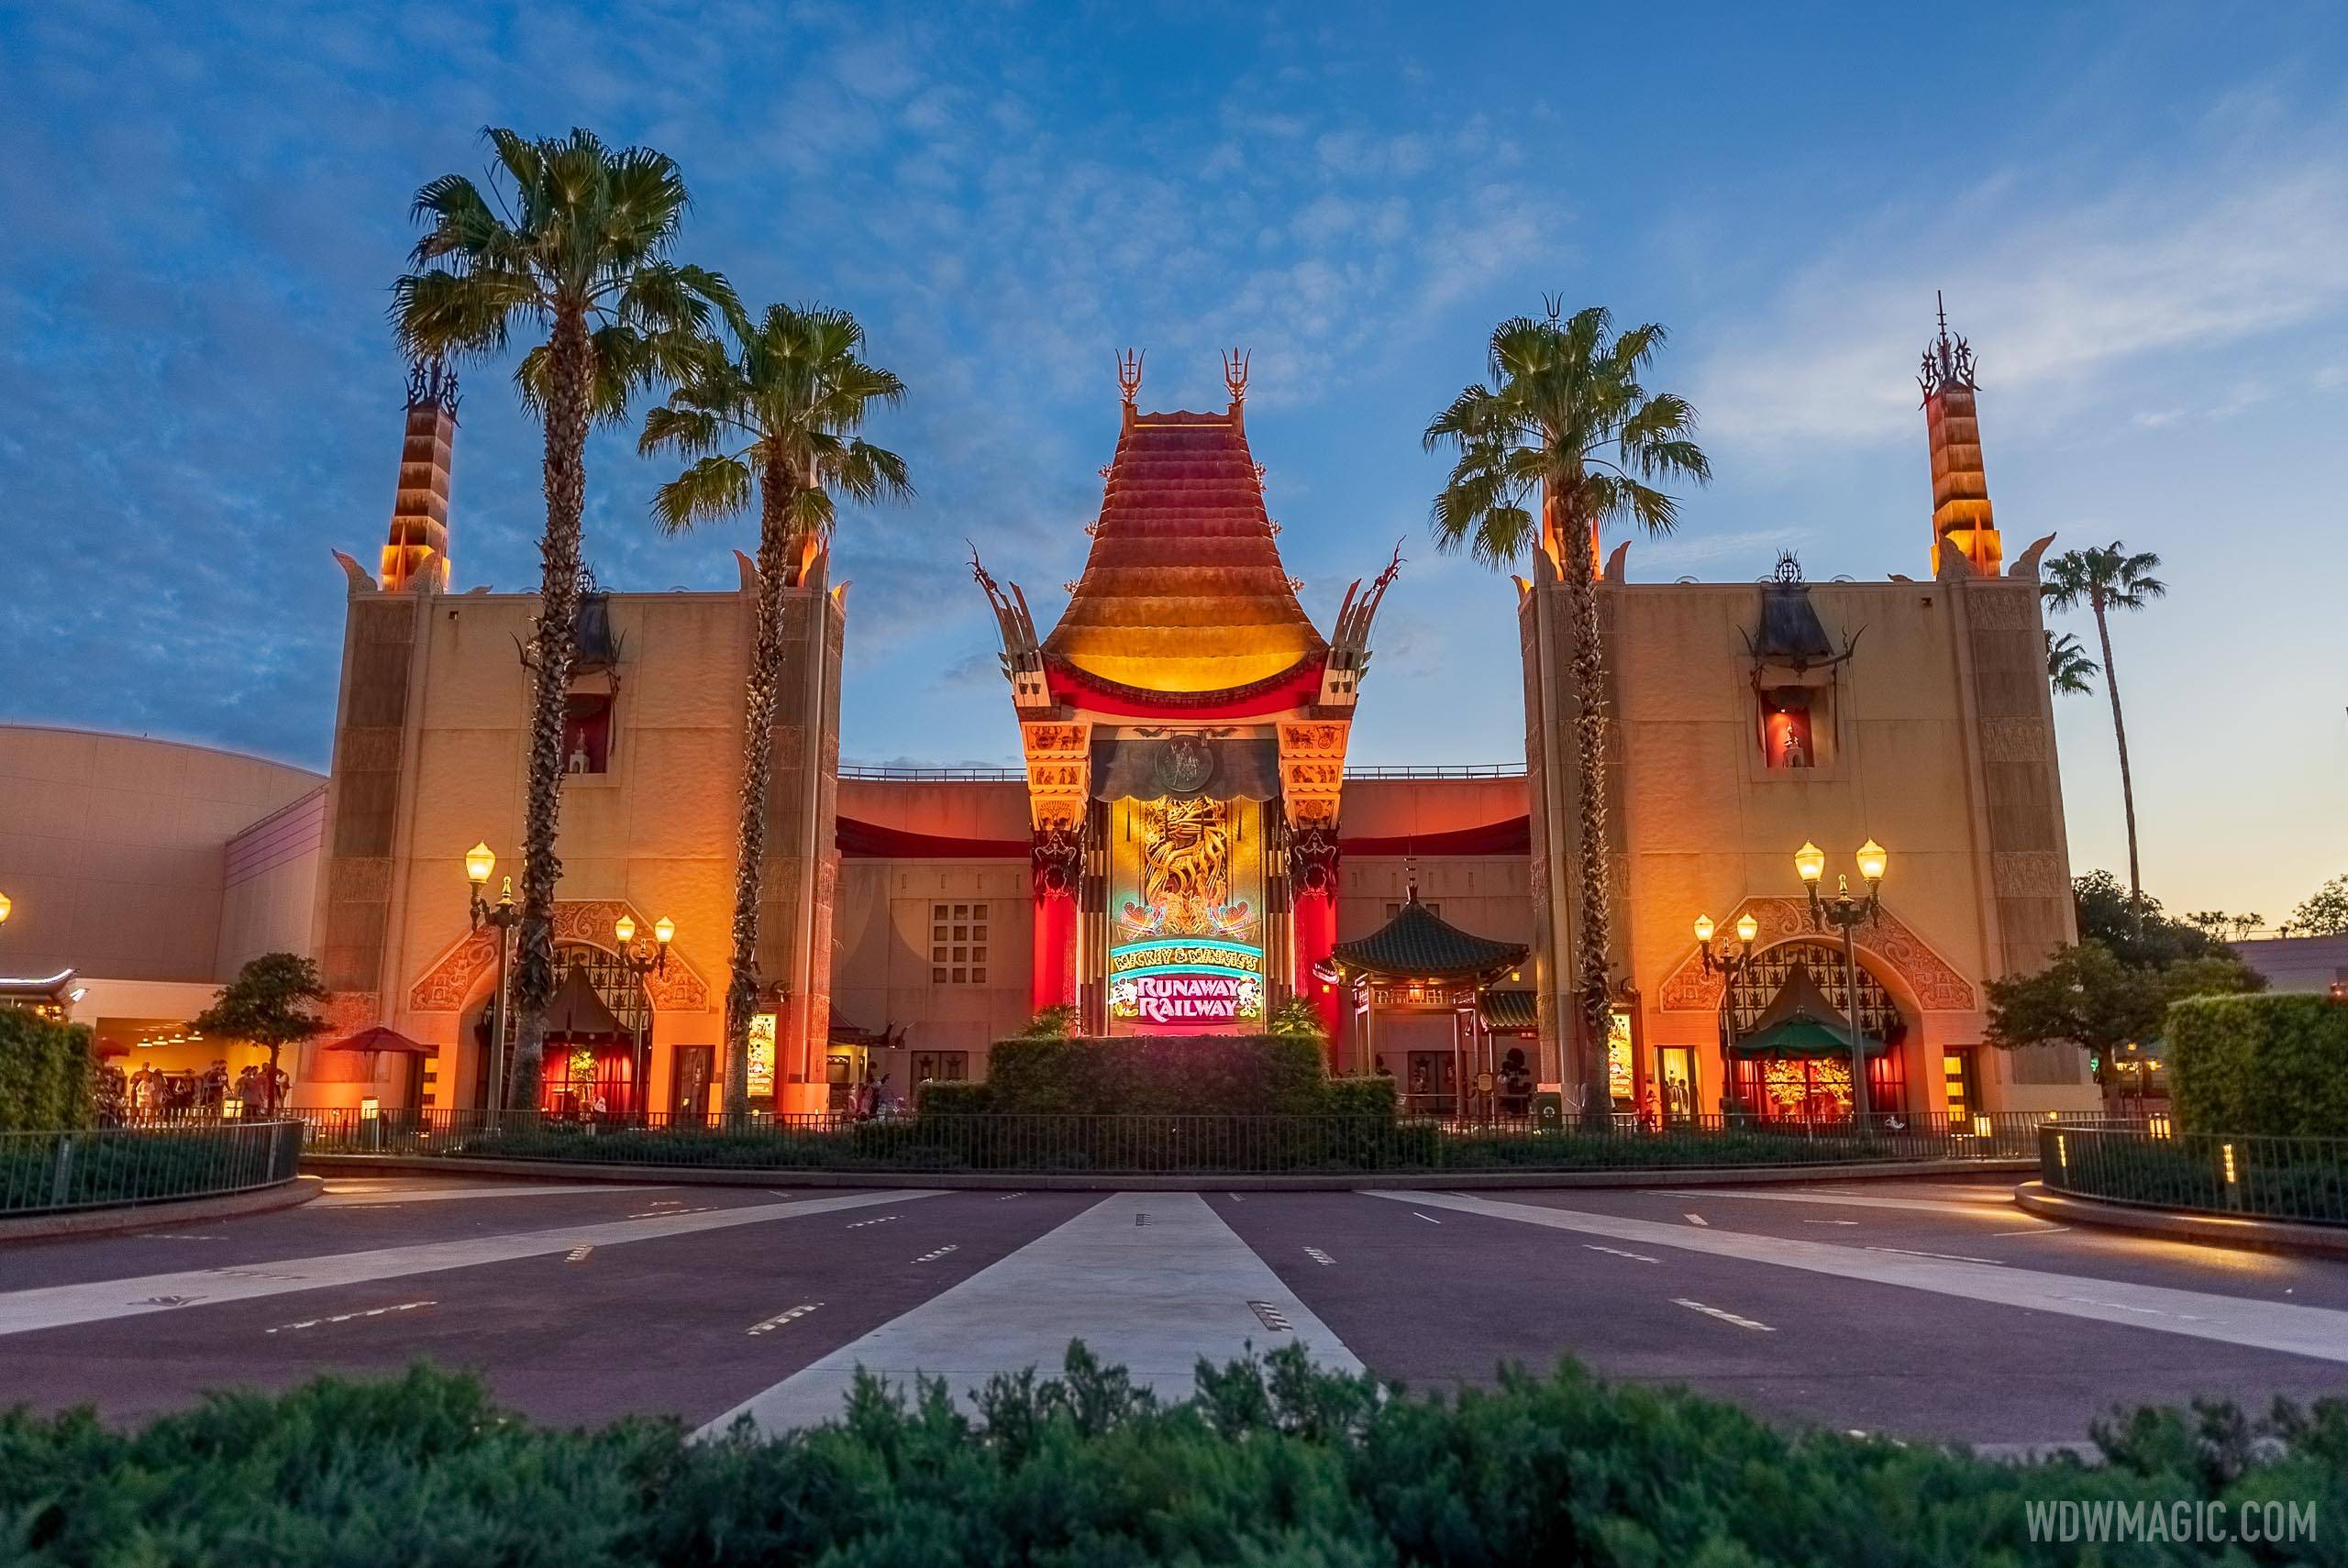 Press Release - Disney's Hollywood Studios official announcement